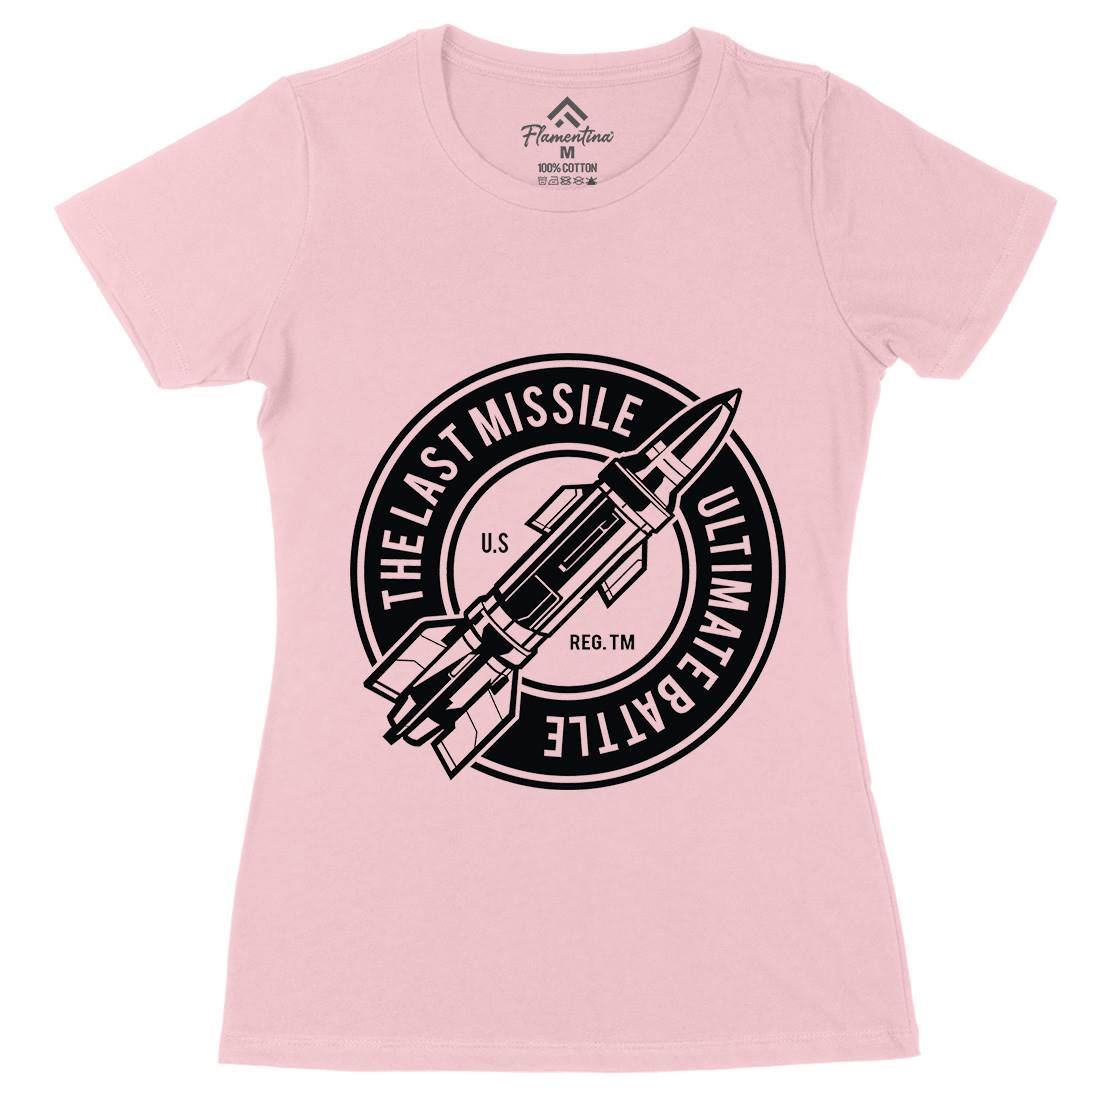 Last Missile Womens Organic Crew Neck T-Shirt Army A175